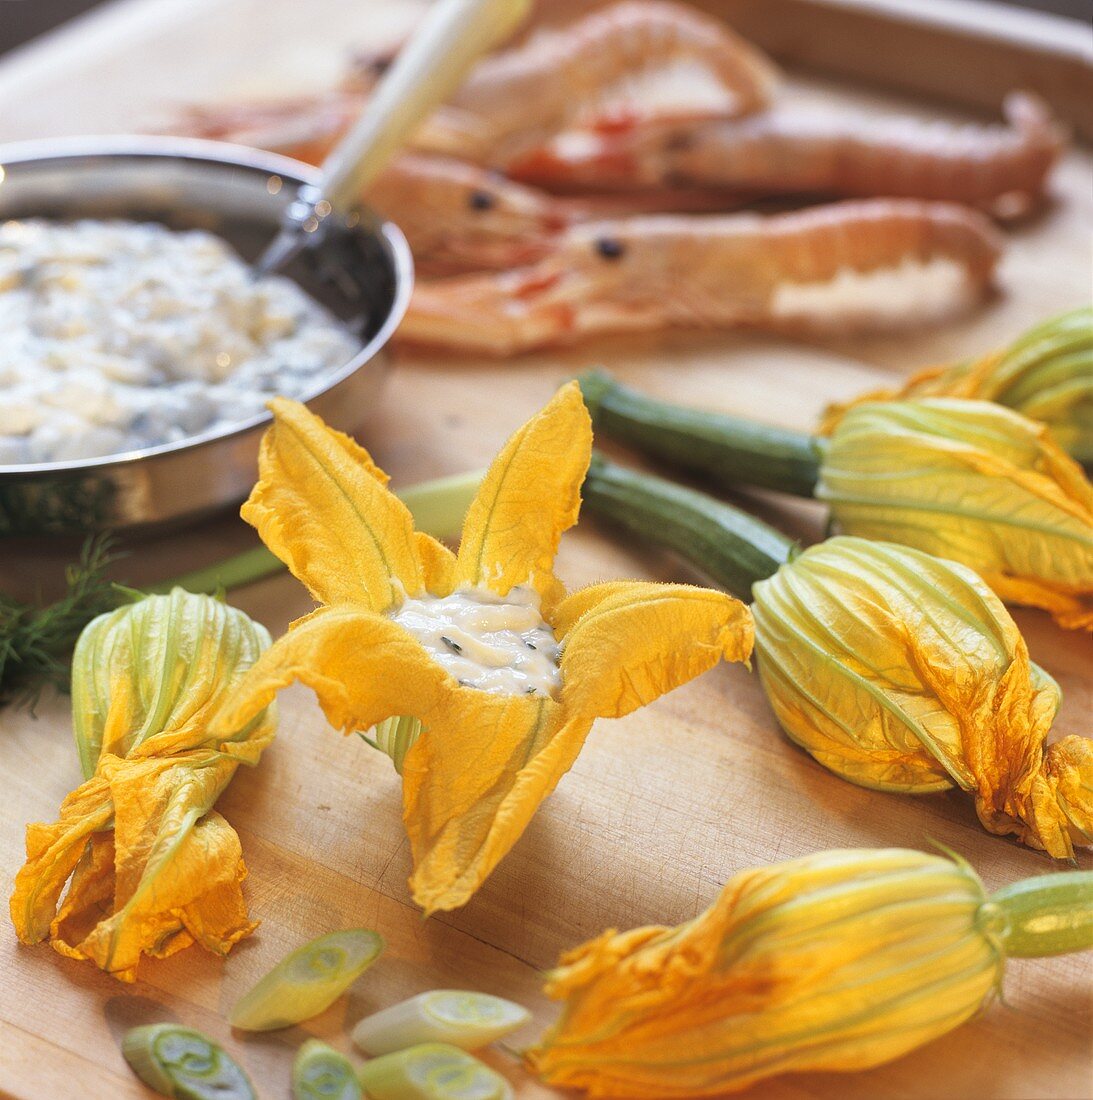 Stuffing courgette flowers